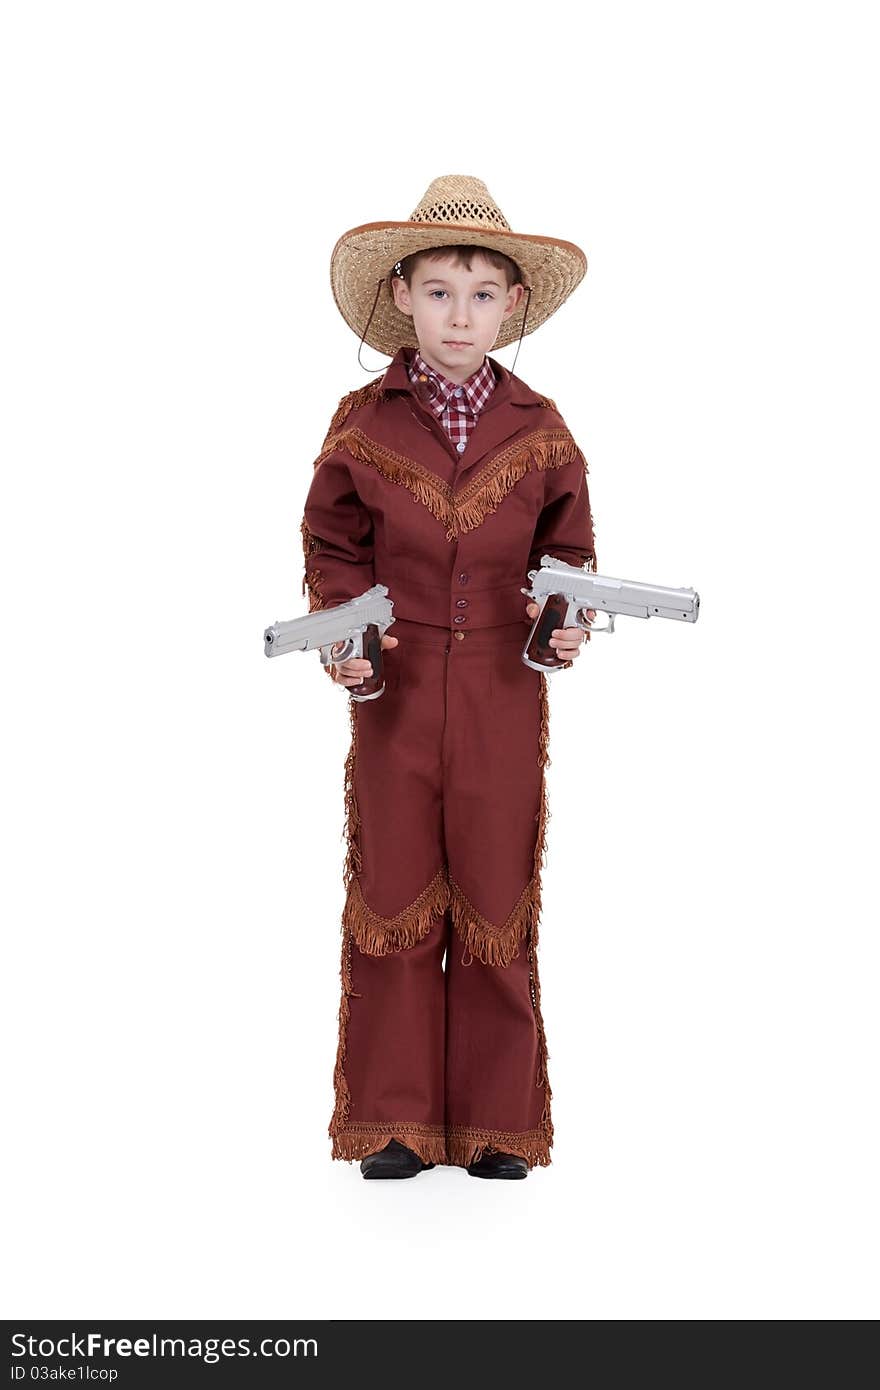 Boy dressed as a cowboy with pistols on a white background